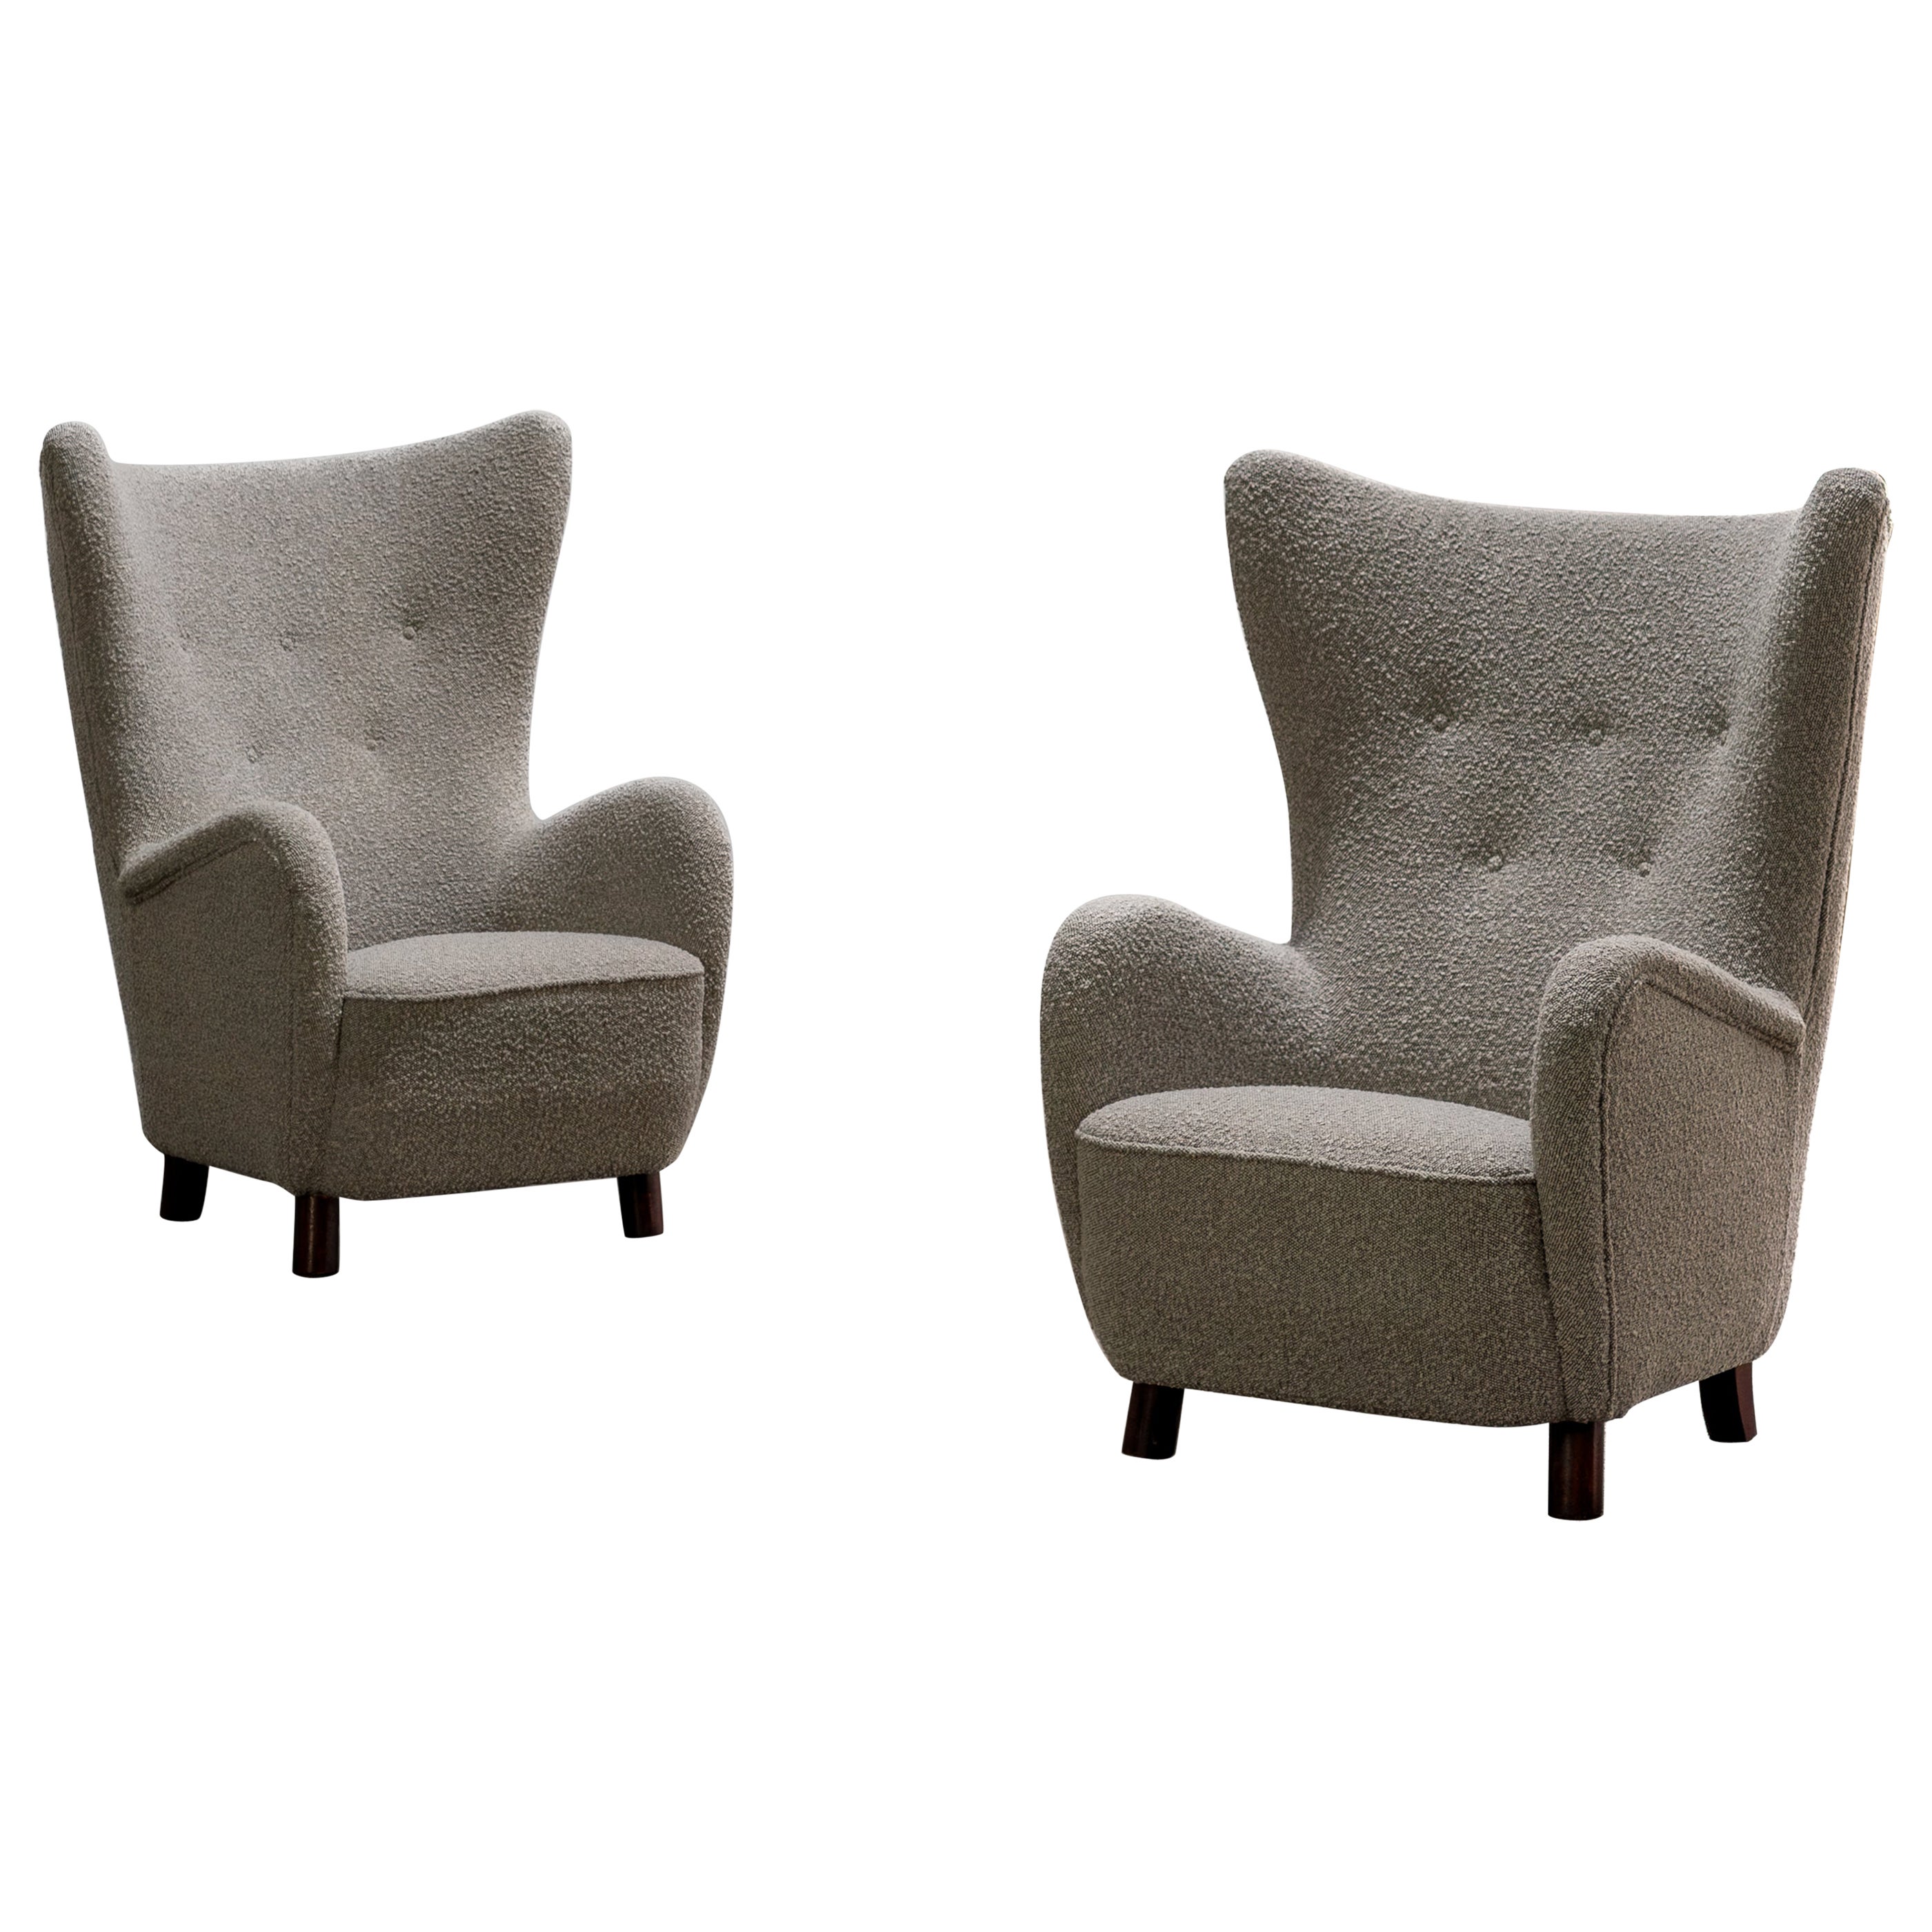 Vintage Mogens Lassen Wingback Chairs From Denmark, Boucle Fabric, 1950s For Sale